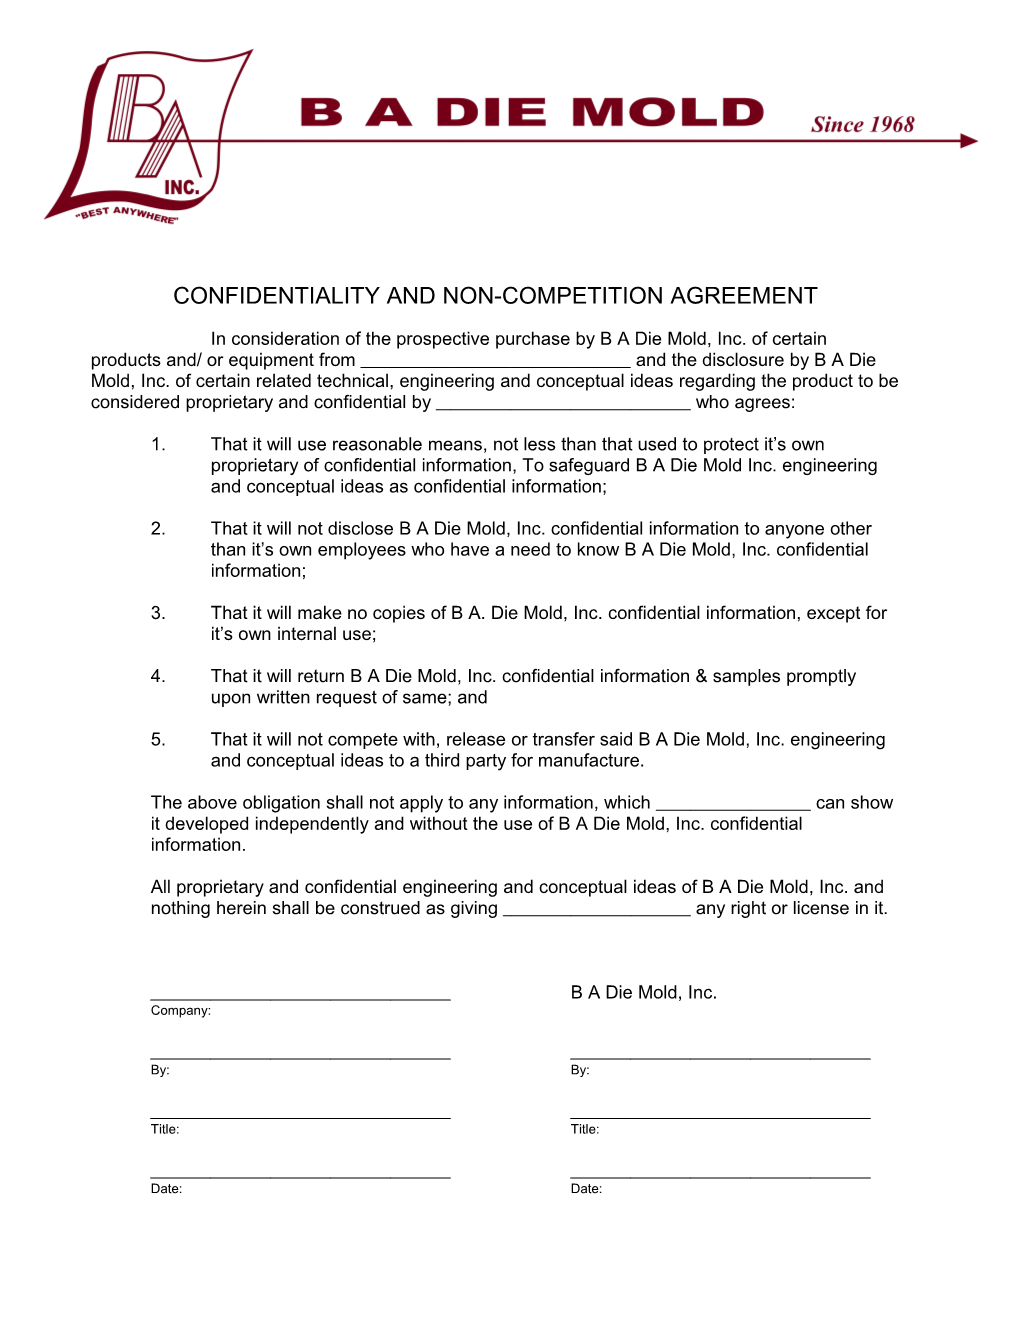 Confidentiality and Non-Competition Agreement